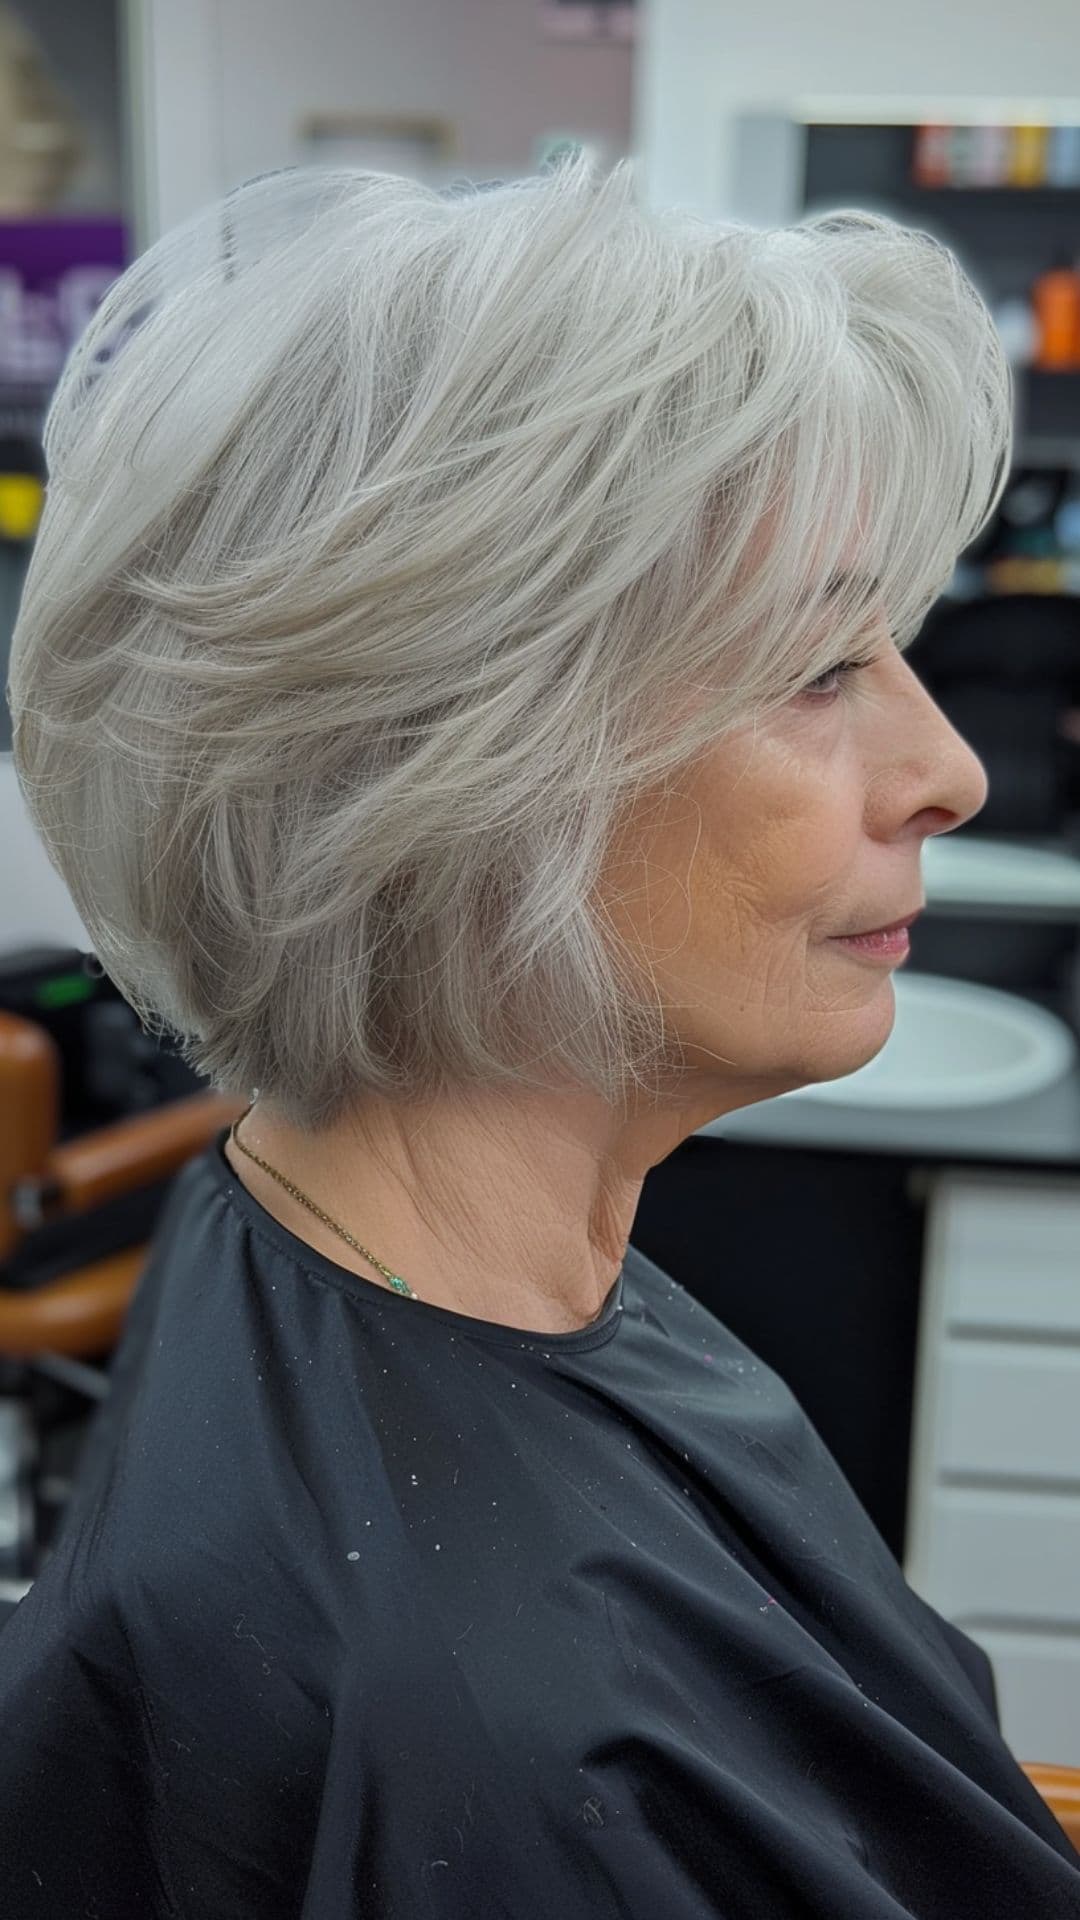 An old woman modelling a short layered cut with texture.